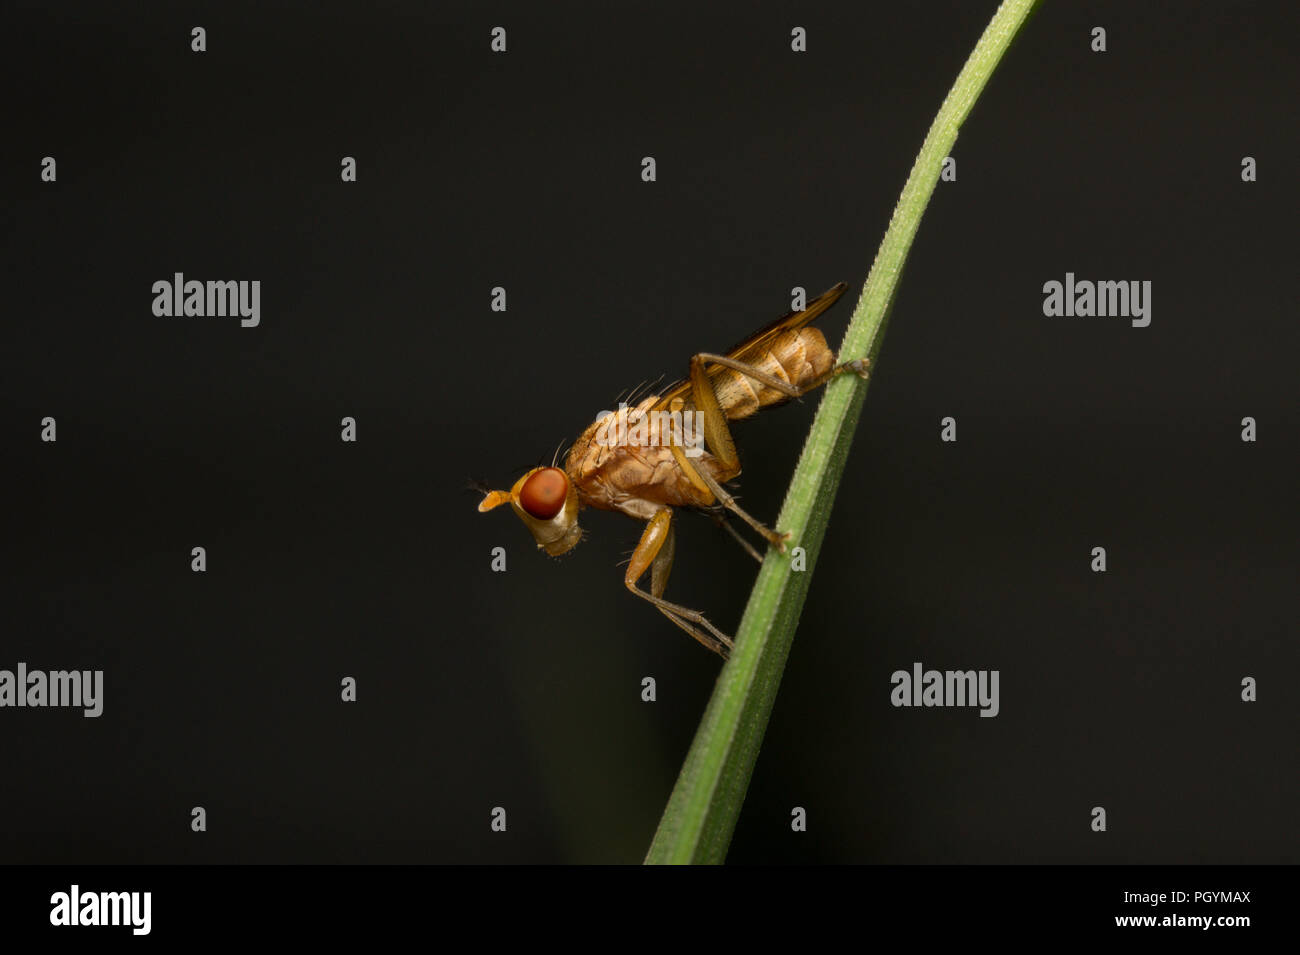 Red-eyed fly perching on a green blade of grass, isolated against a black background. Stock Photo